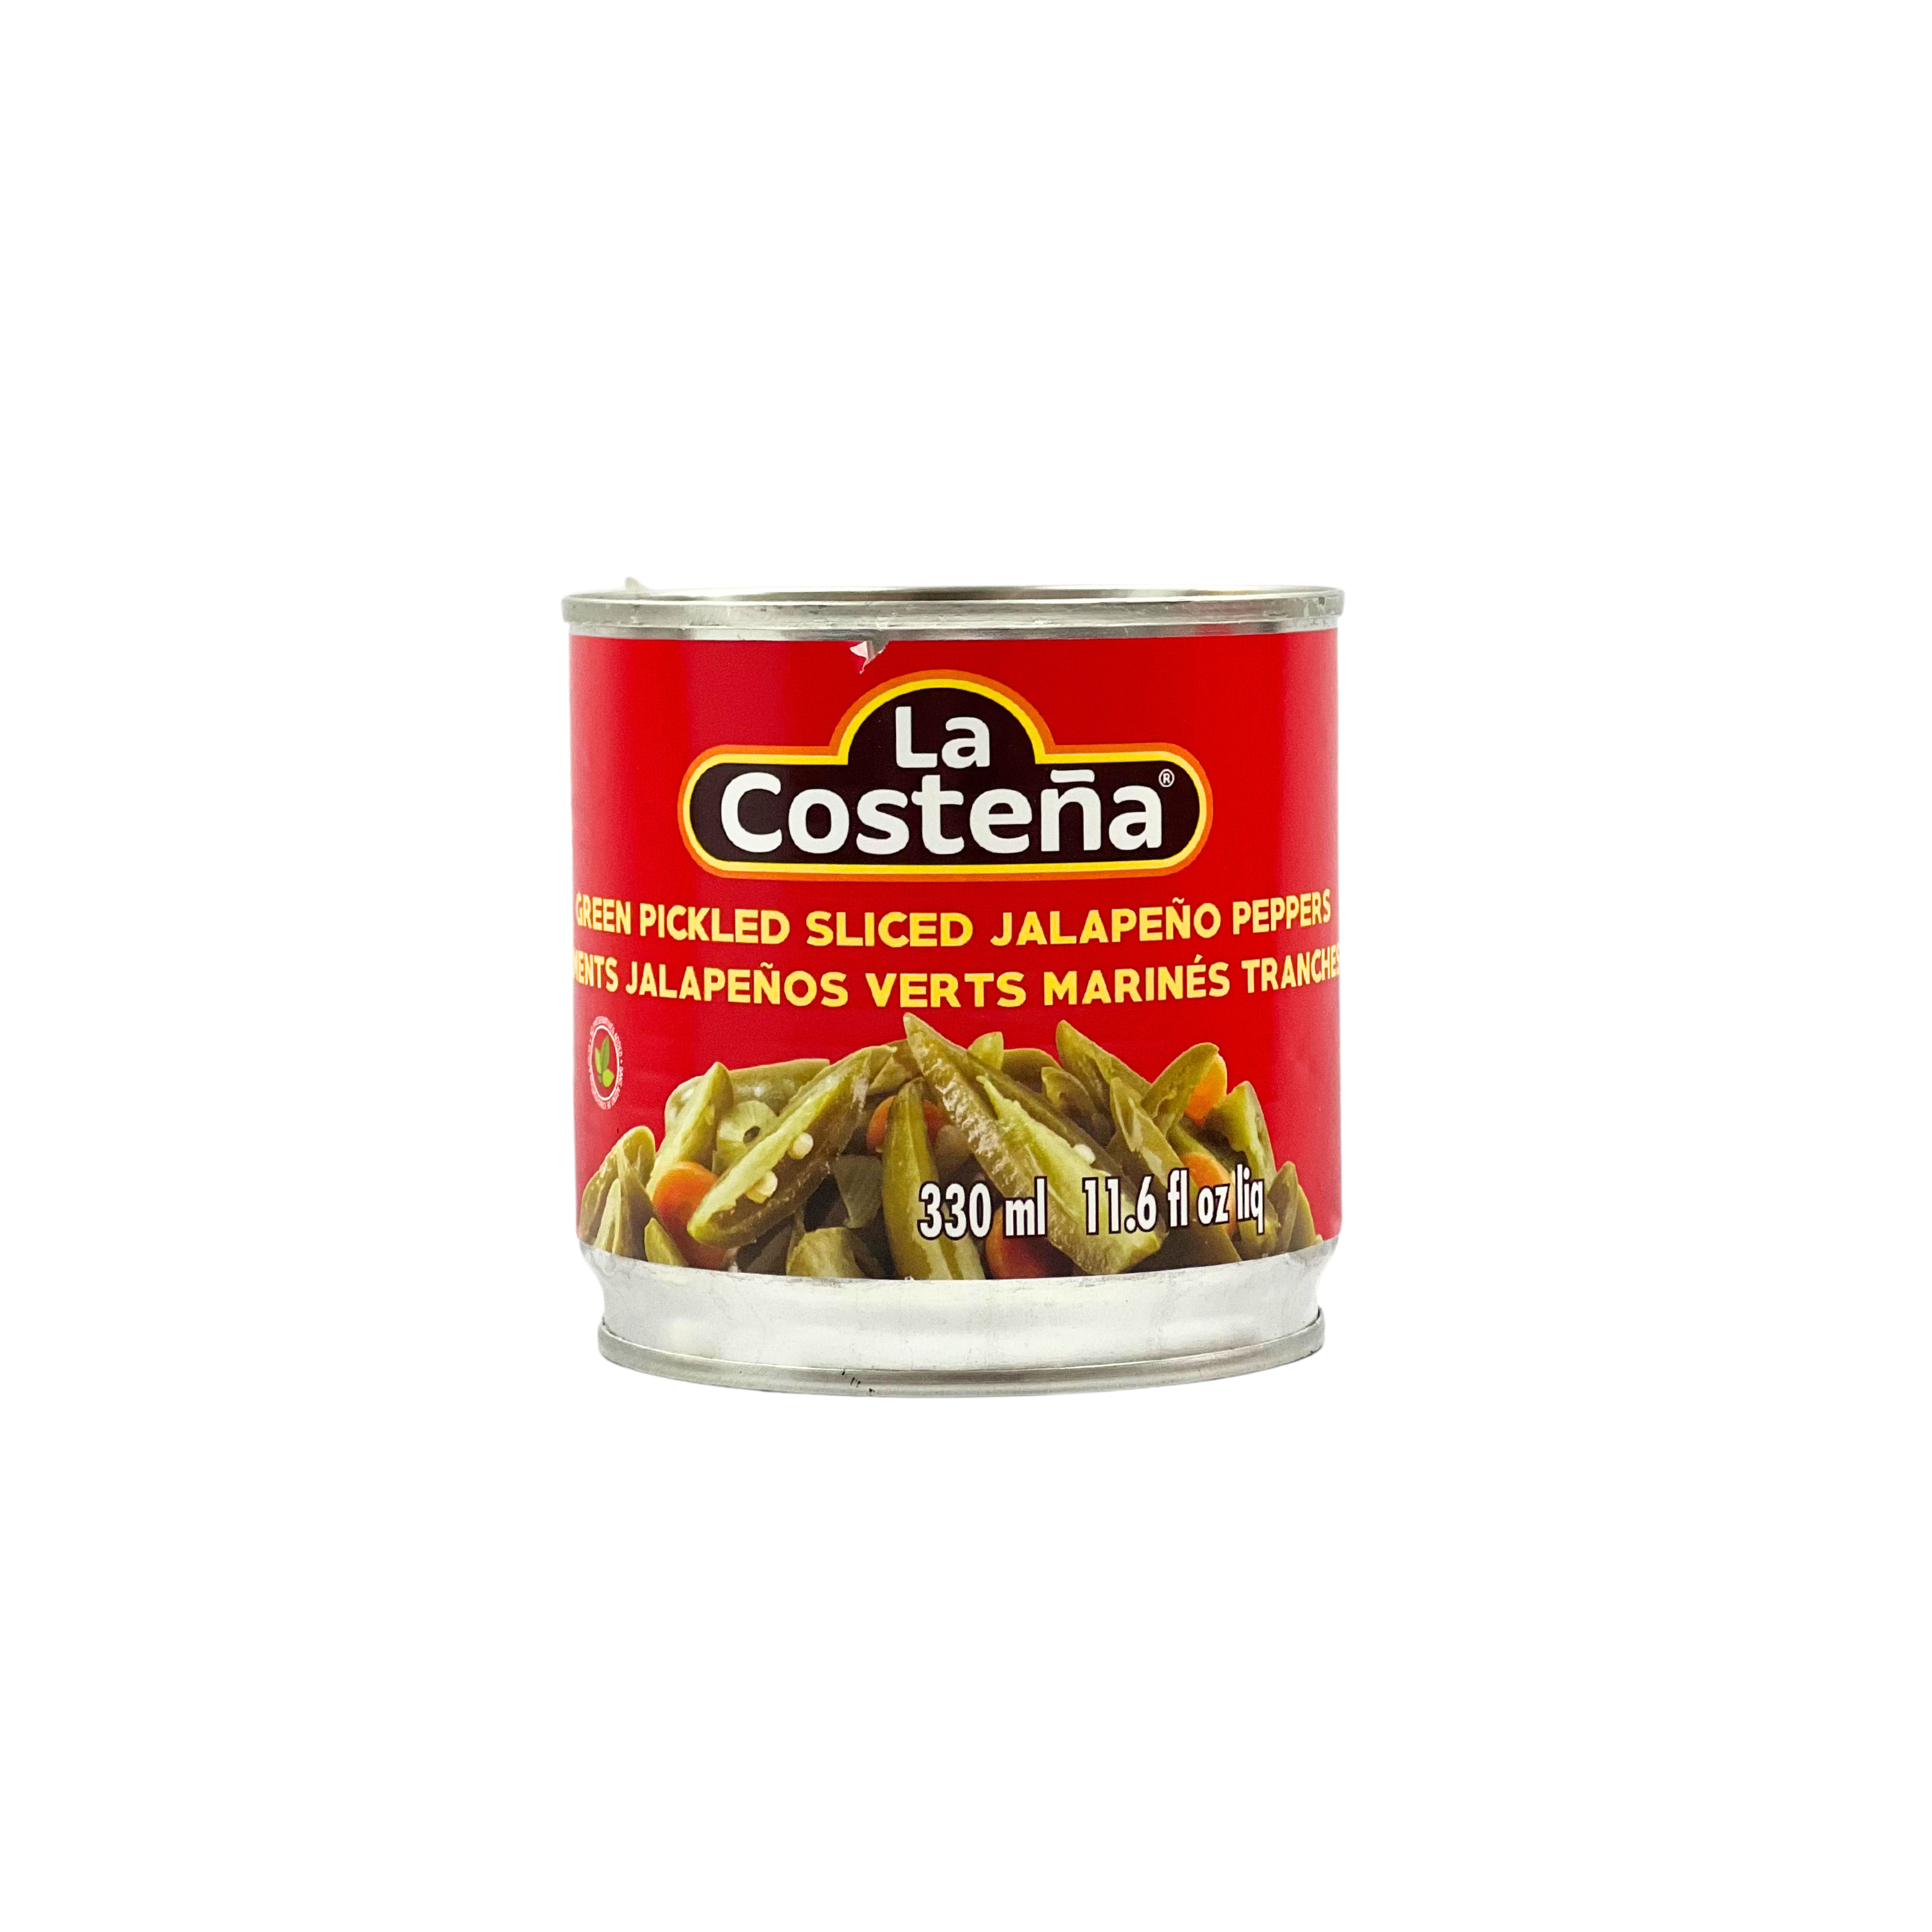 La Costena Green Pickled Sliced Jalapeno Peppers 330ml